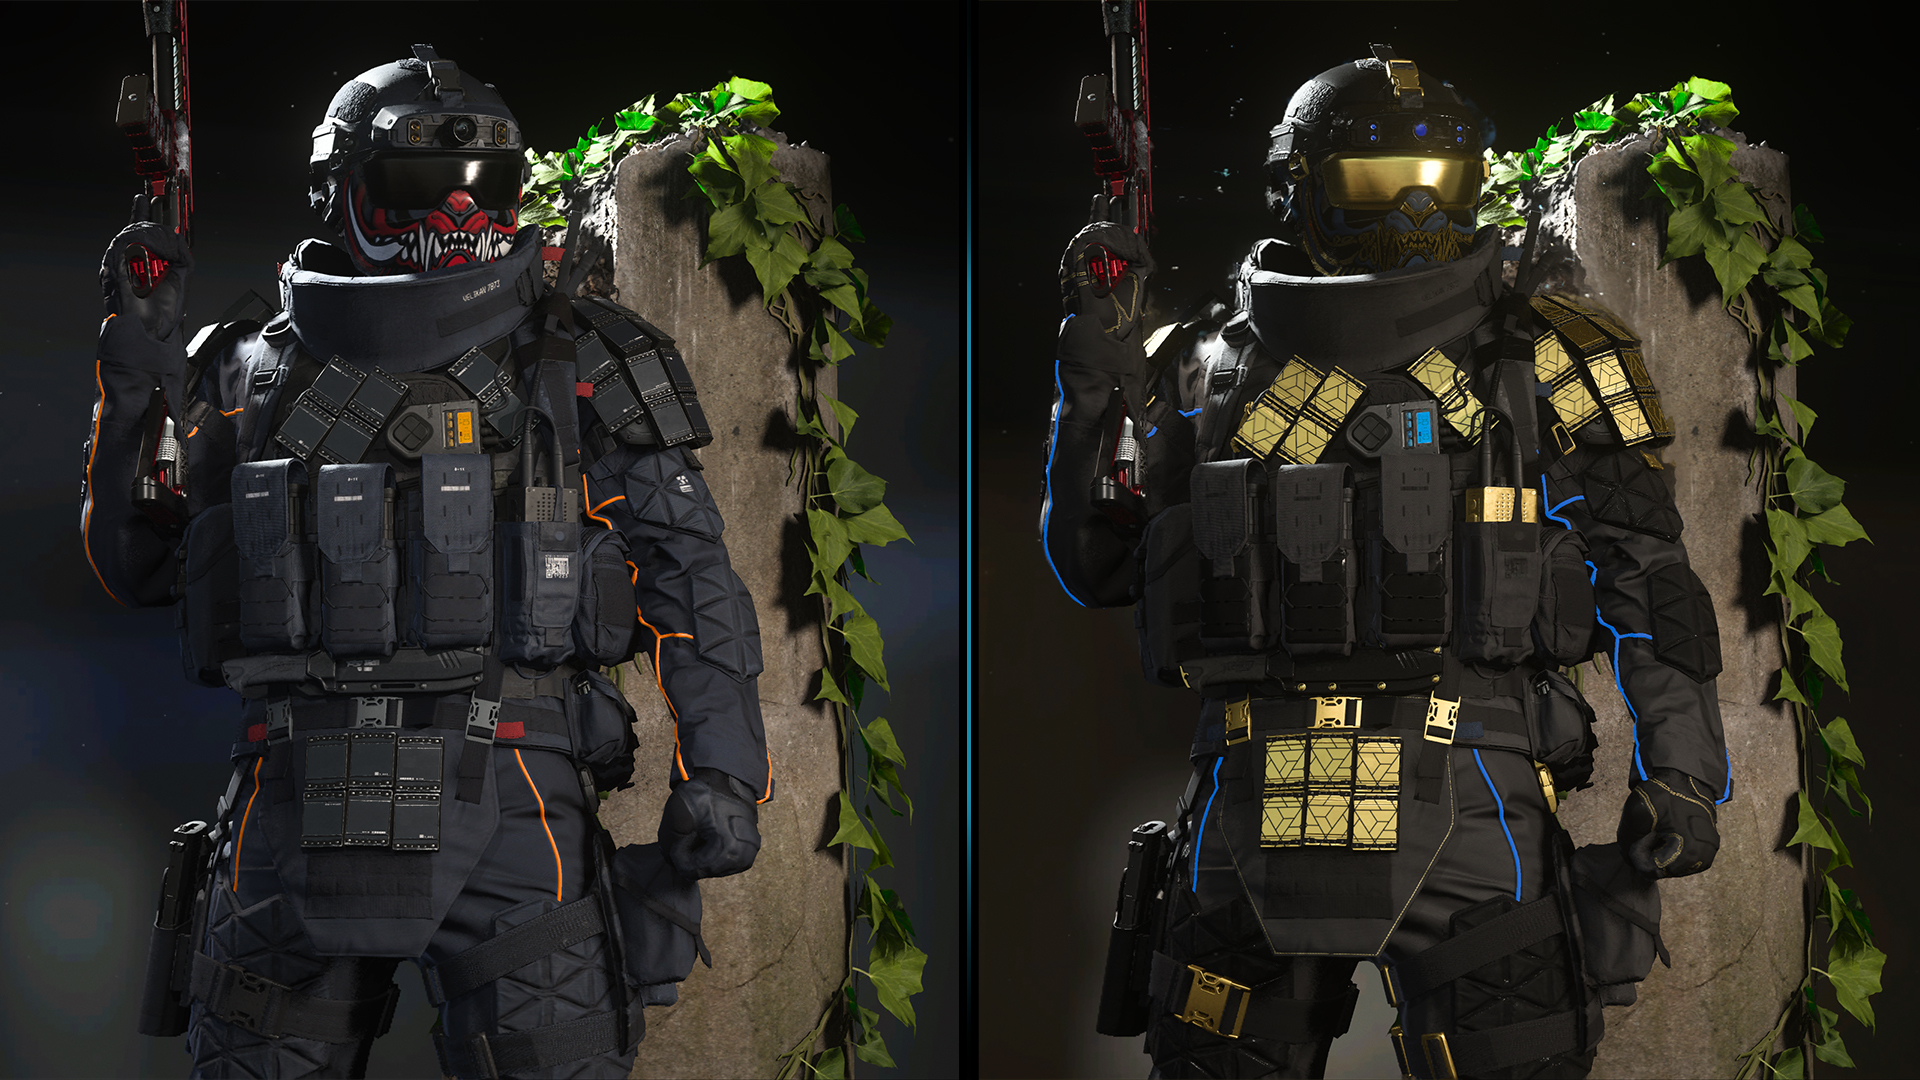 Vault Edition Operator “Warden” She actually looks pretty cool